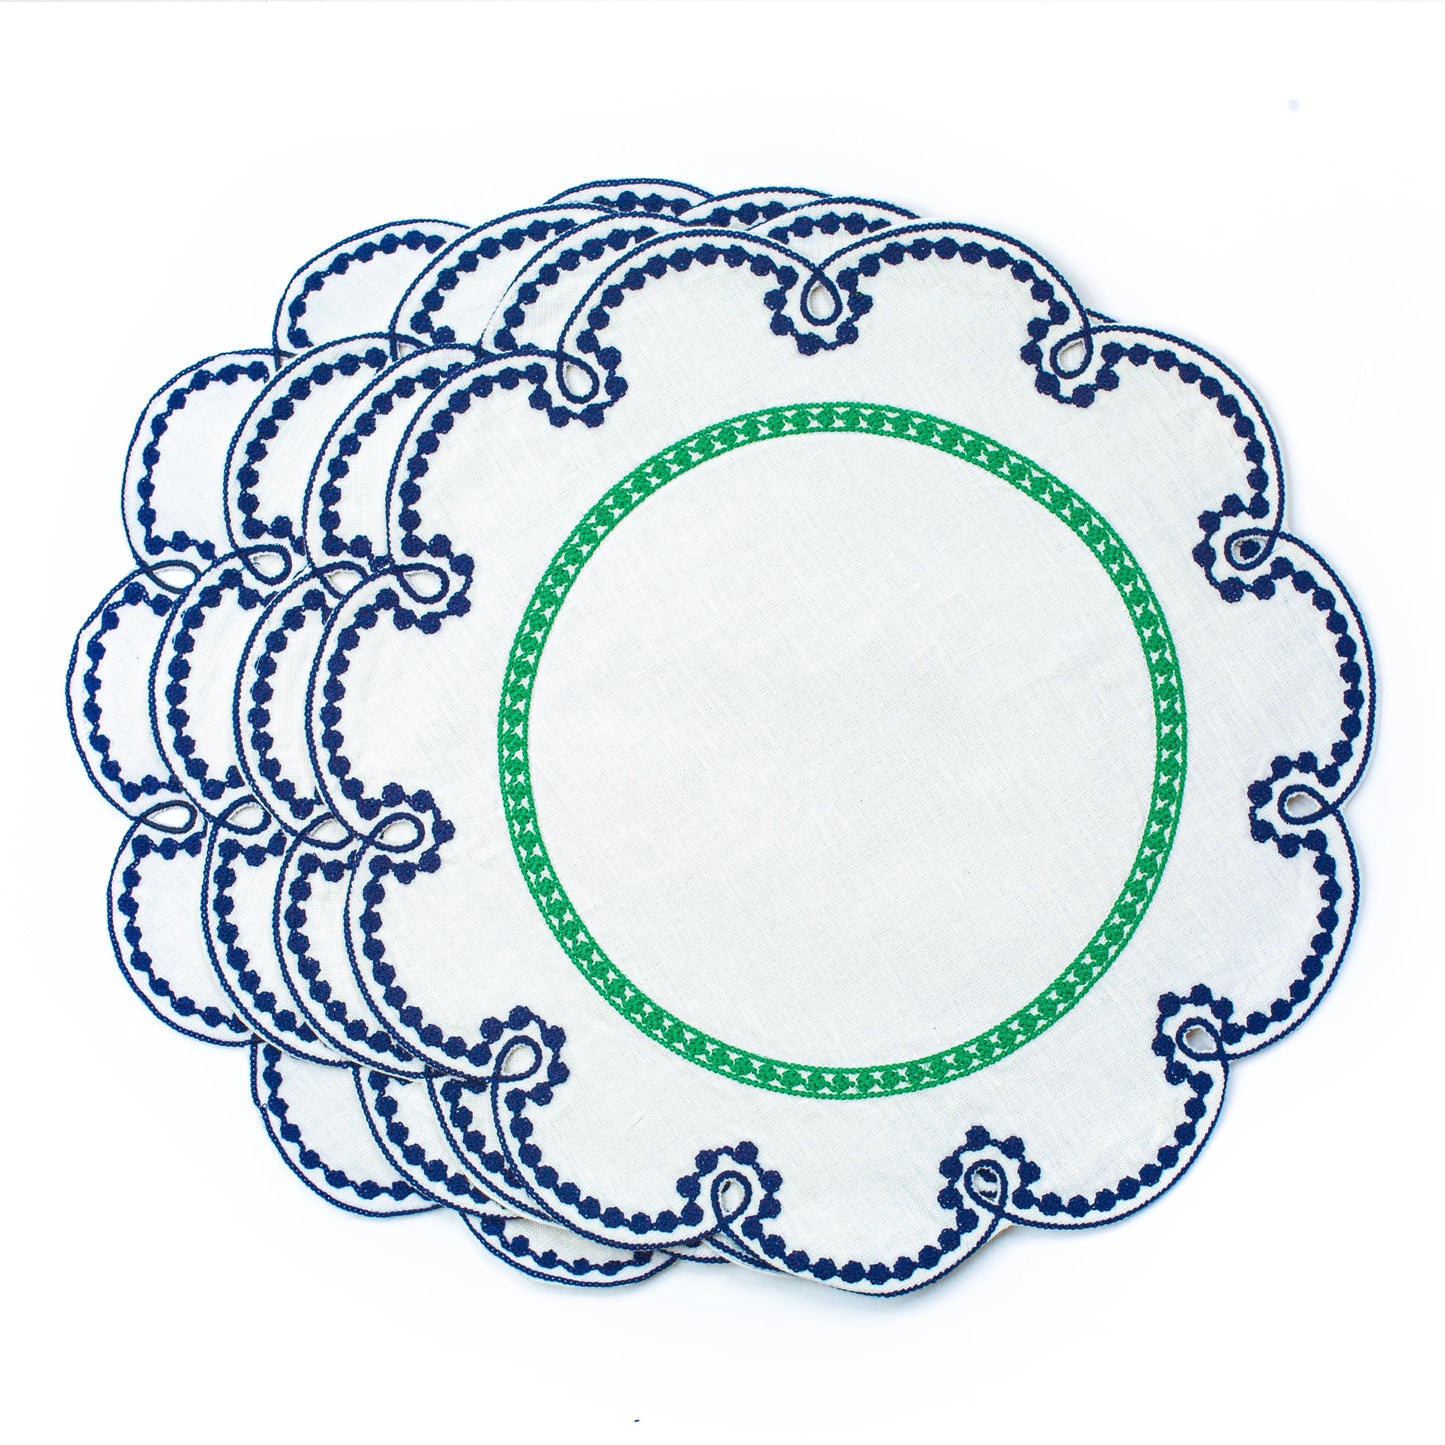 Fete Embroidered Linen Placemats in Blue/Green (Set of 4)